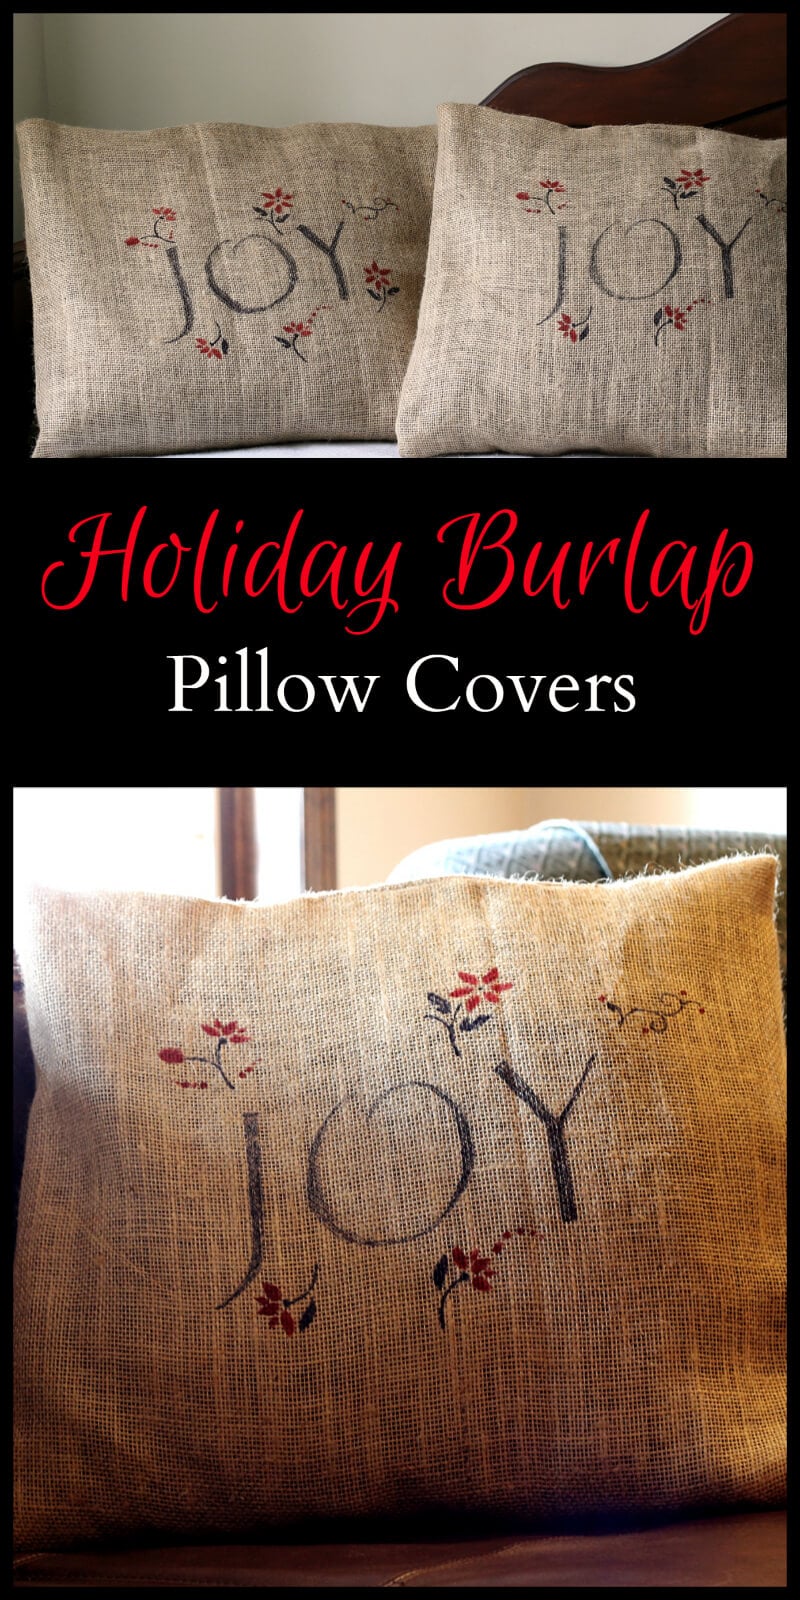 This project for holiday burlap pillow covers is really easy and I'll show you two tricks that you can use in the future for any time of year.